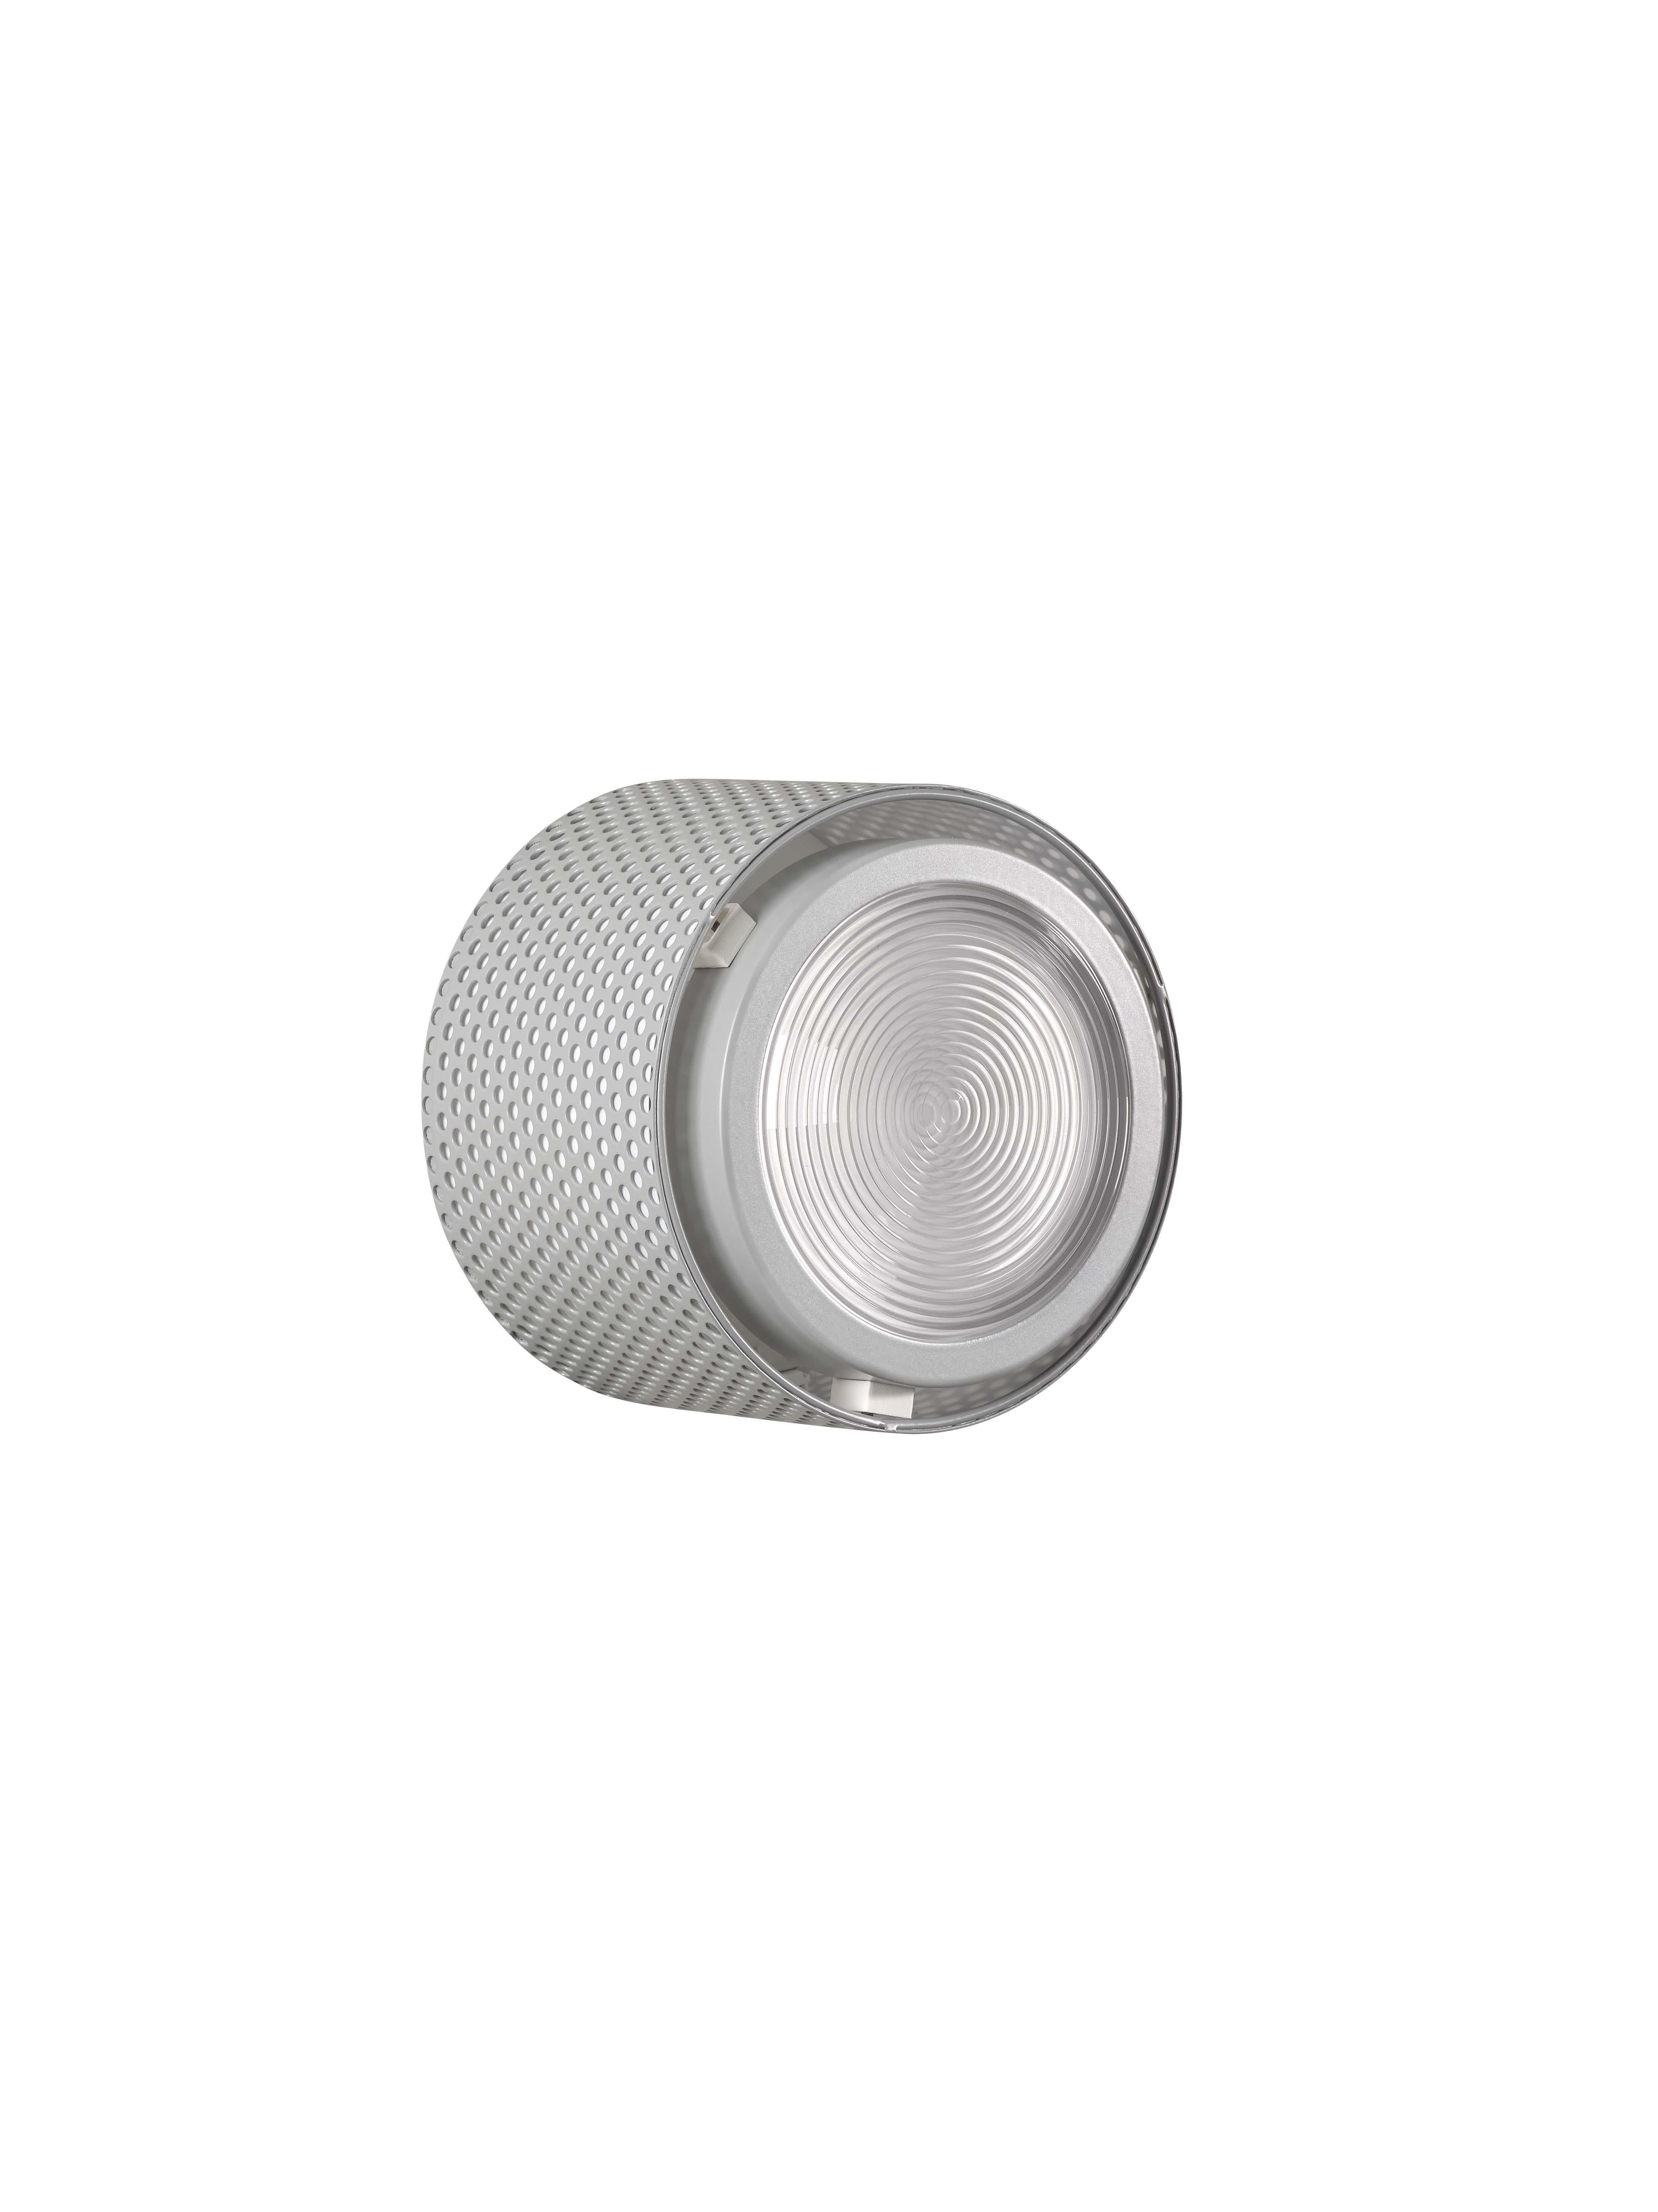 Small Pierre Guariche 'G13' Wall or Ceiling Light for Sammode Studio in Gray For Sale 2